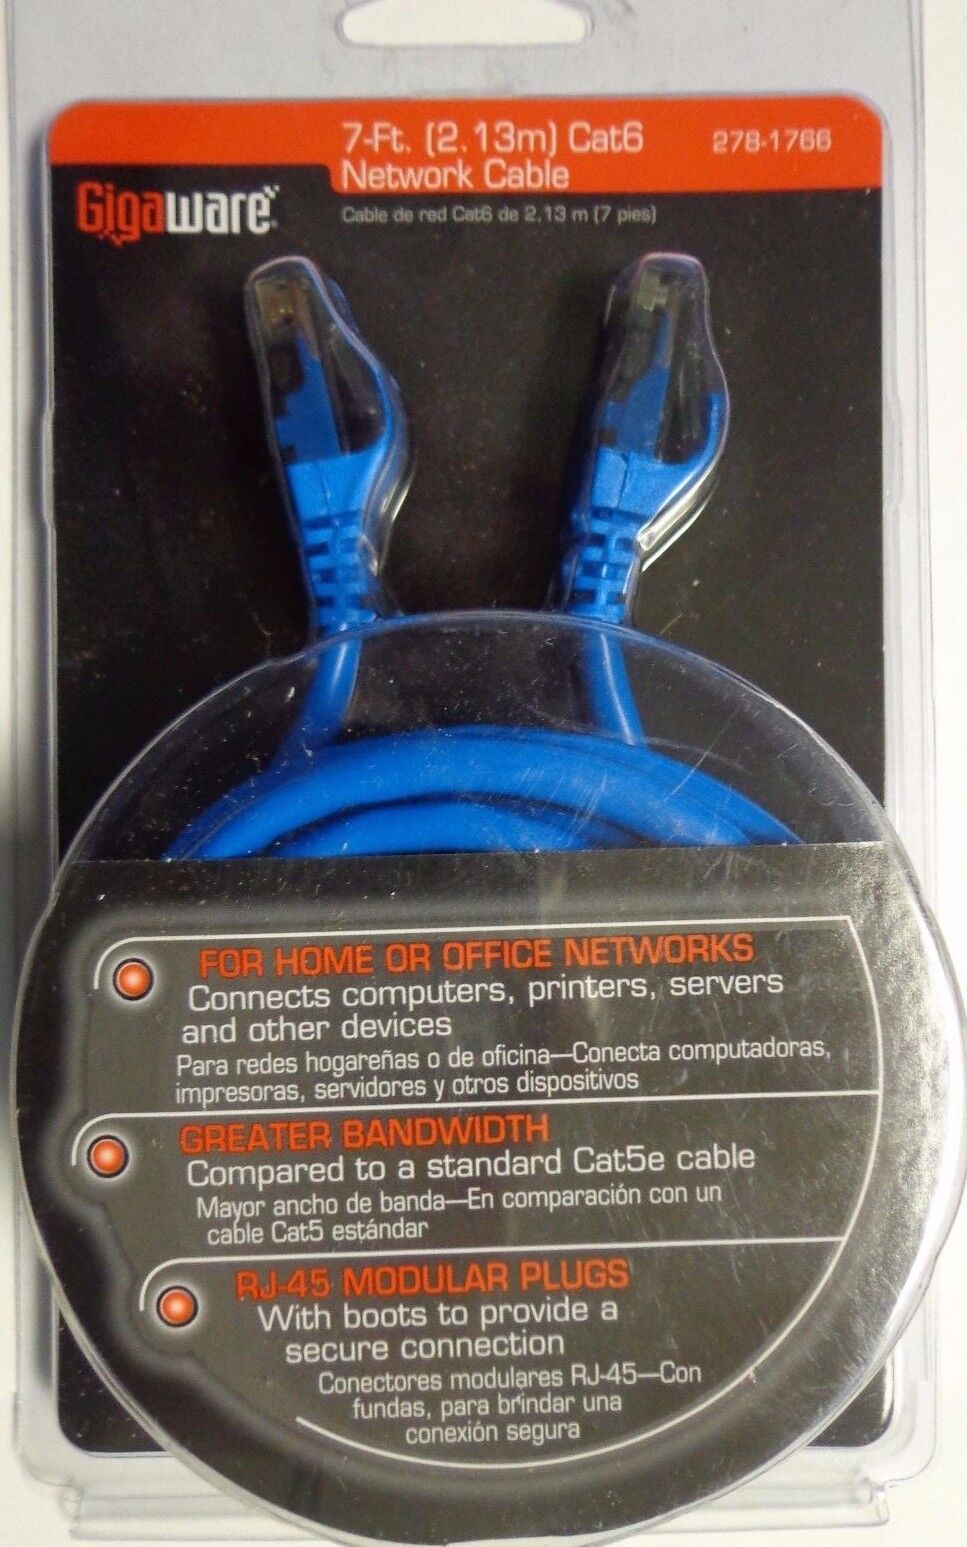 RadioShack 7ft (2.13m) Cat6 Network Cable by GigaWare 2781766  -10